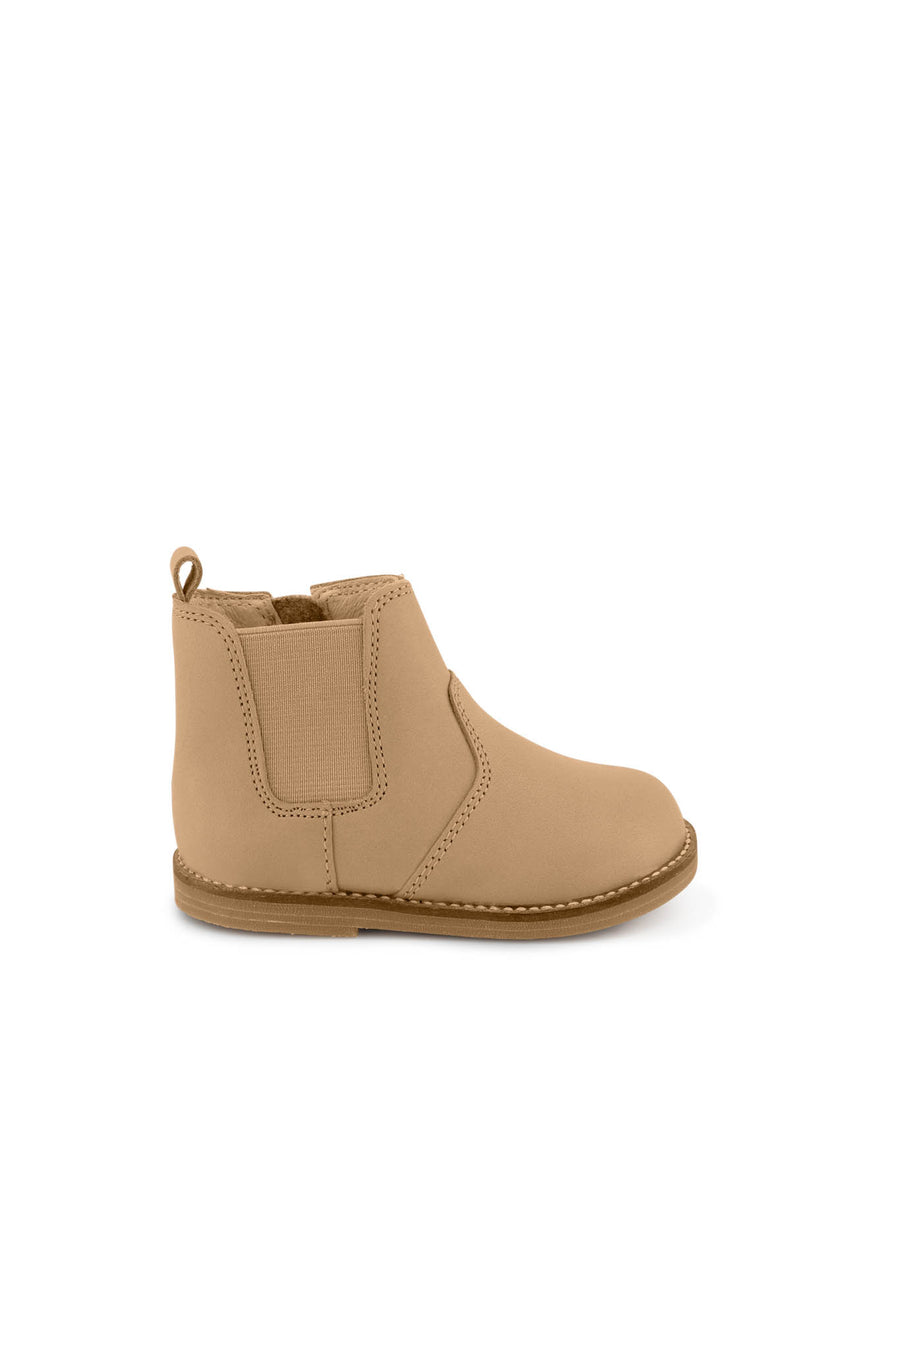 Leather Boot with Elastic Side - Bronzed Childrens Footwear from Jamie Kay NZ